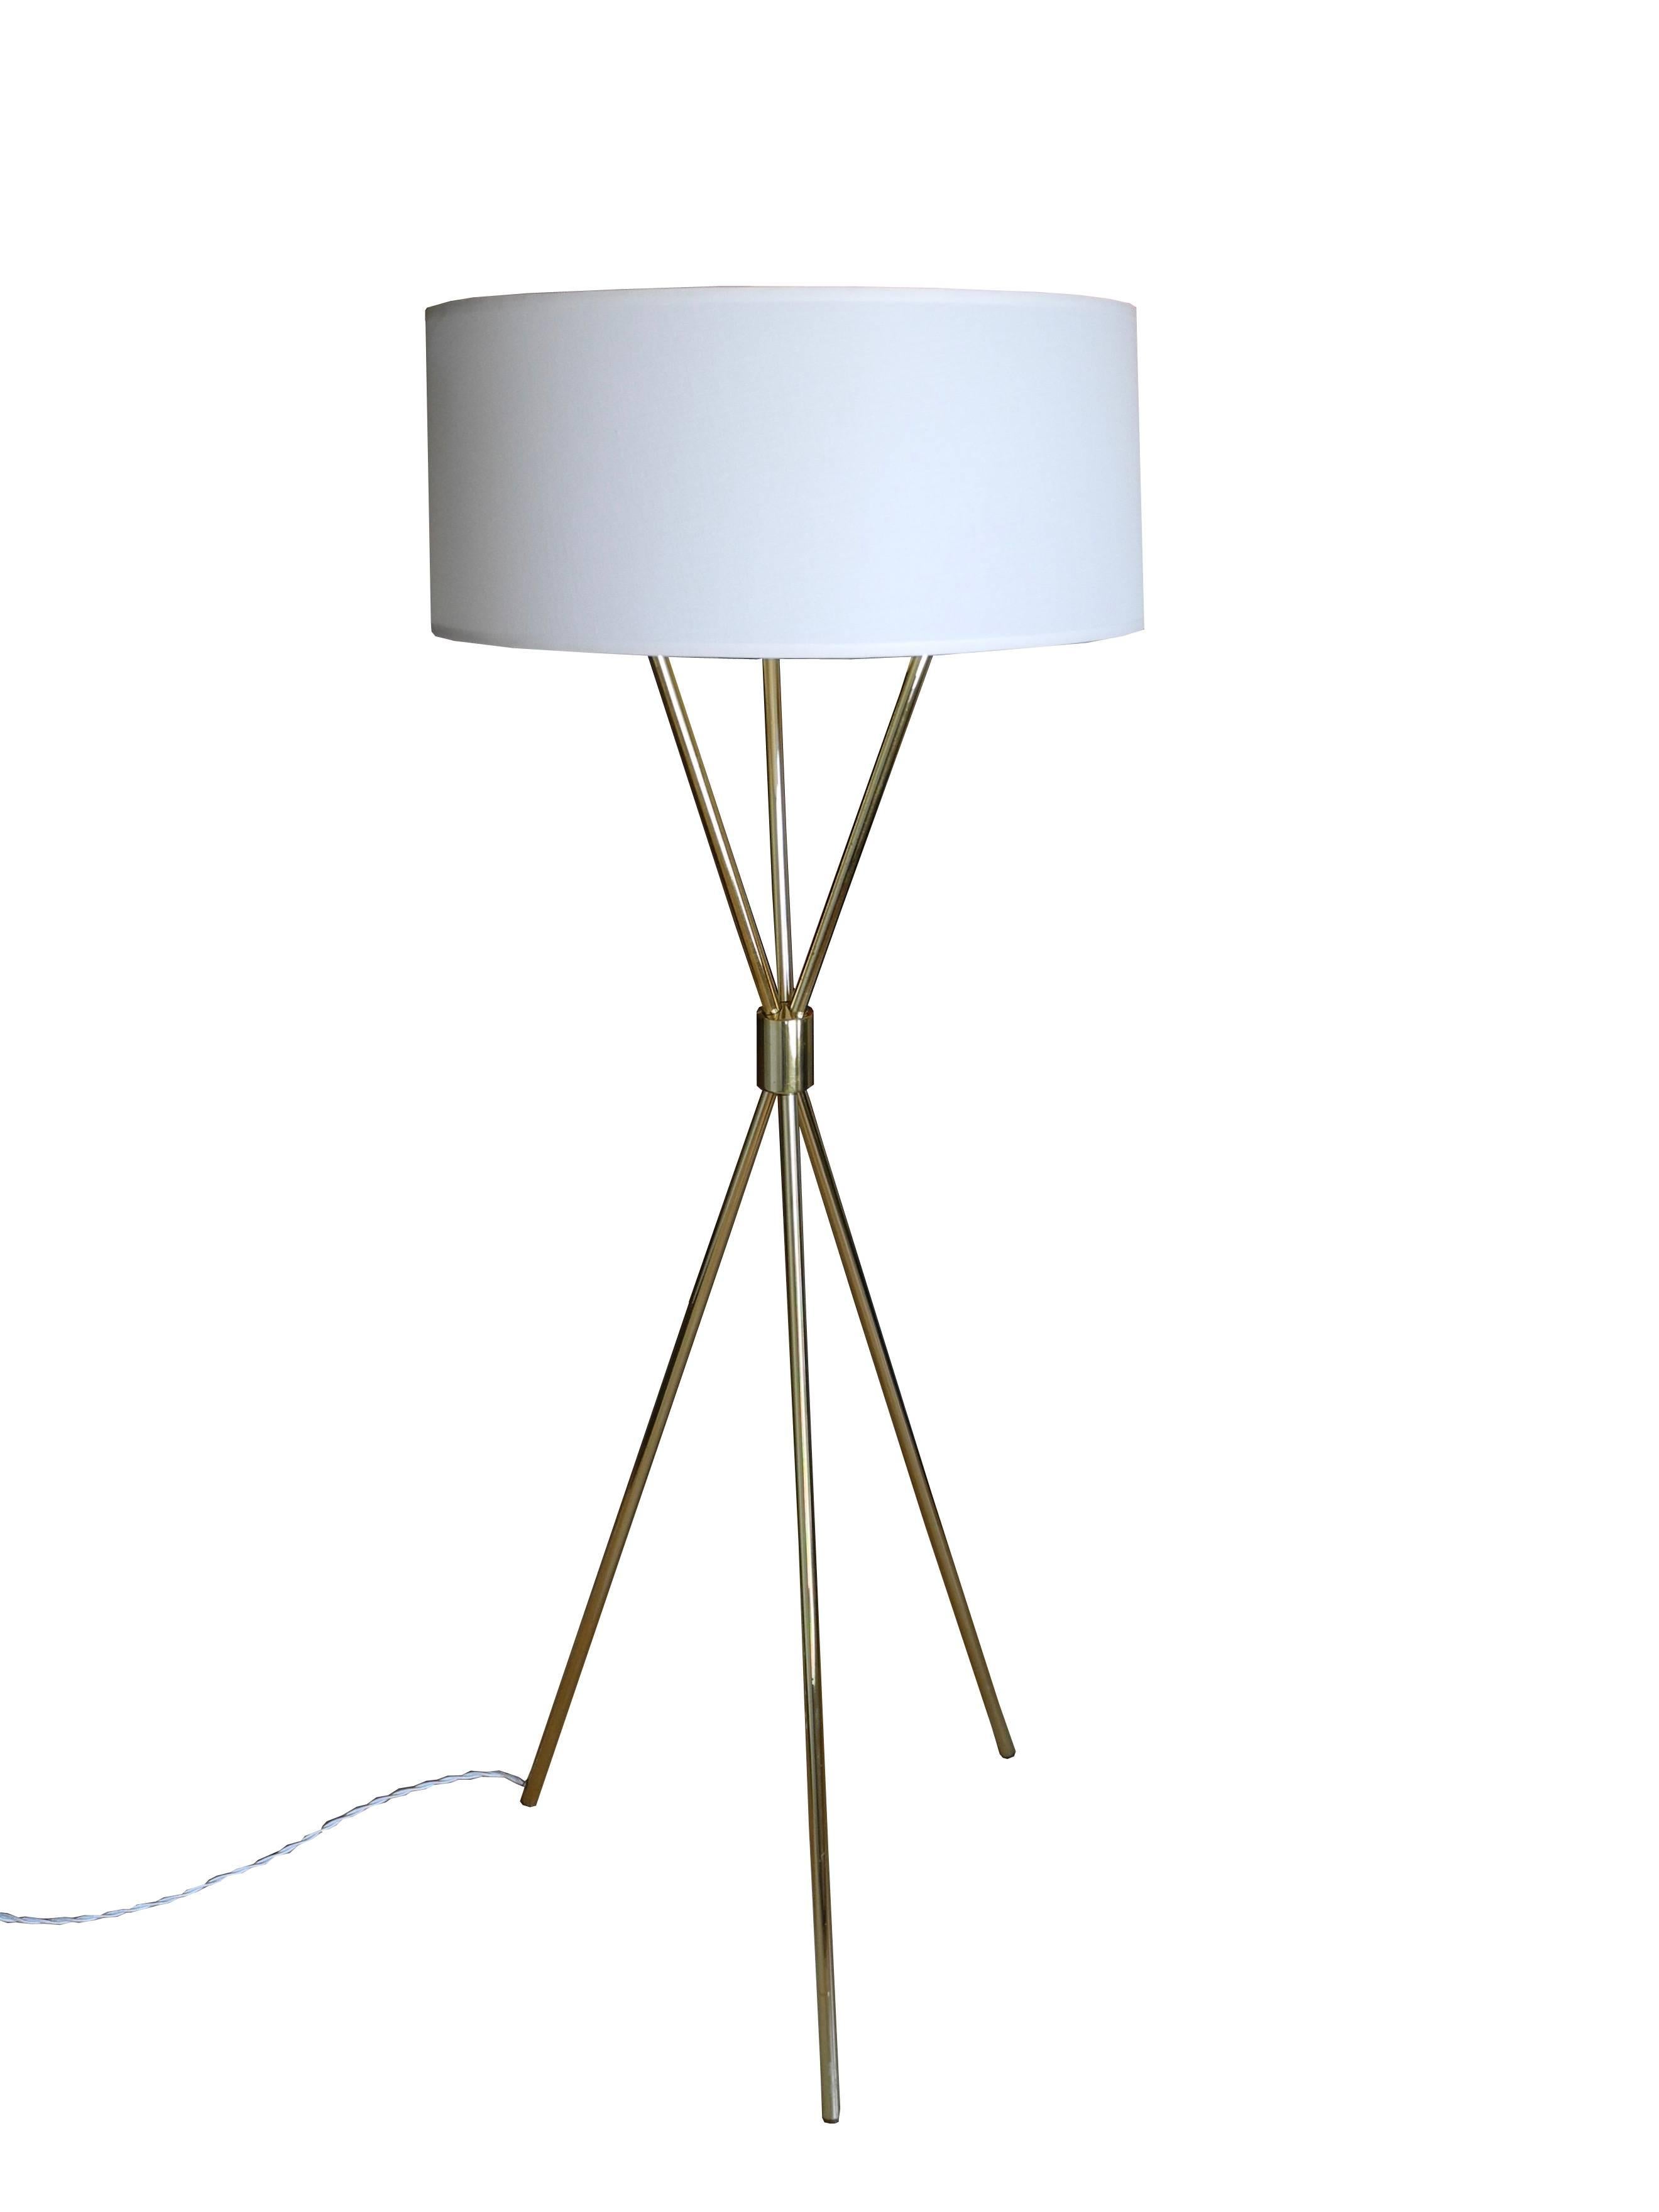 This solid brass floor lamp is topped with a white linen shade measuring 7